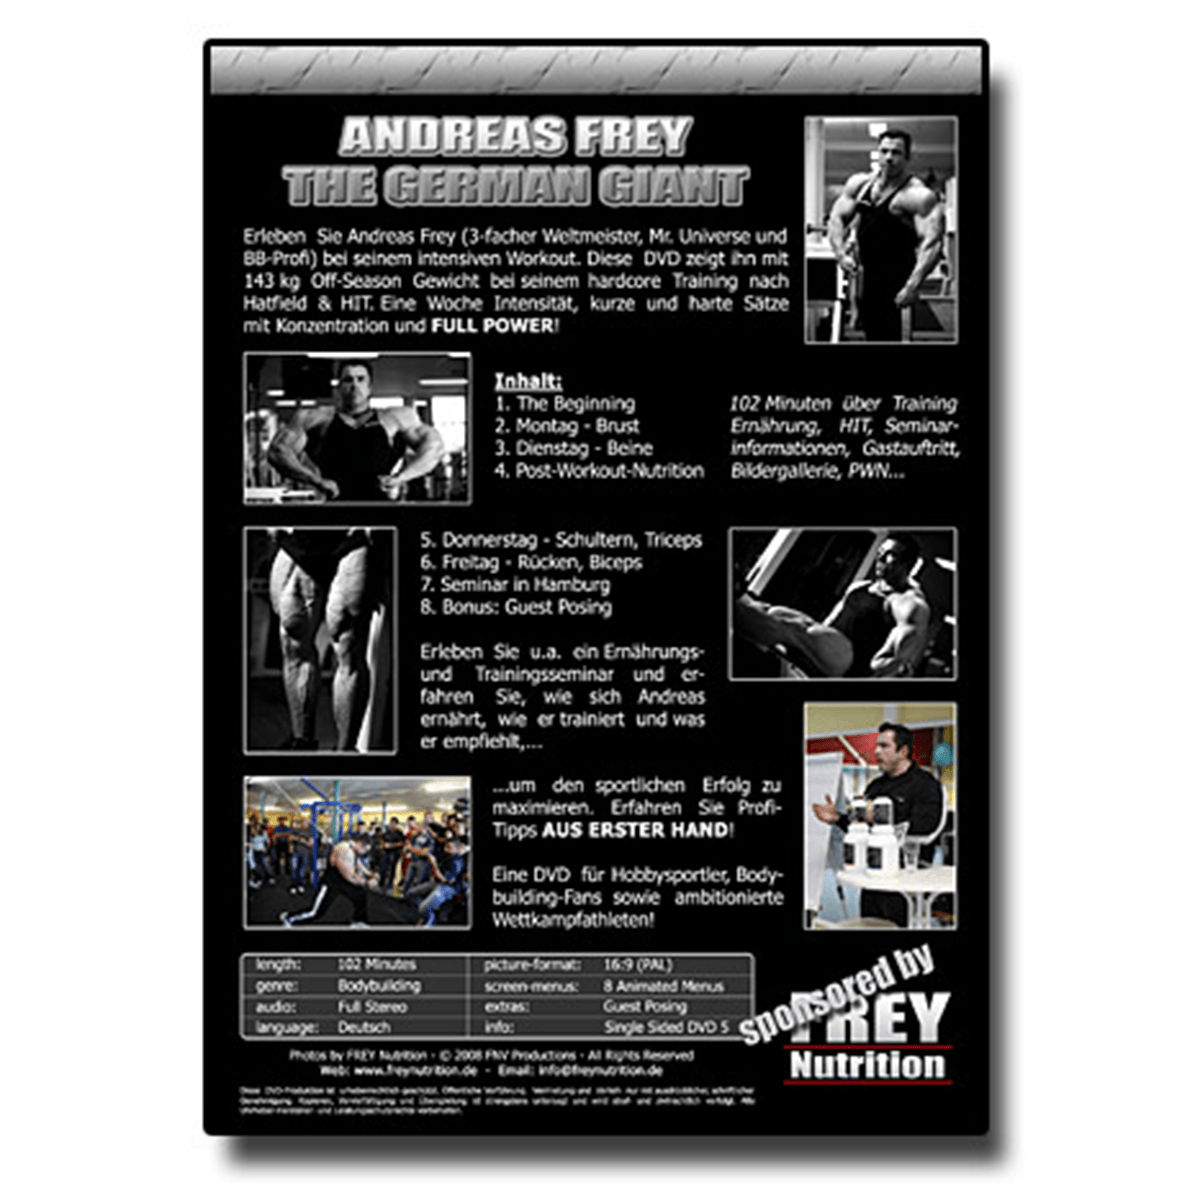 ANDREAS FREY - THE GERMAN GIANT - Demo-Frey-Nutrition